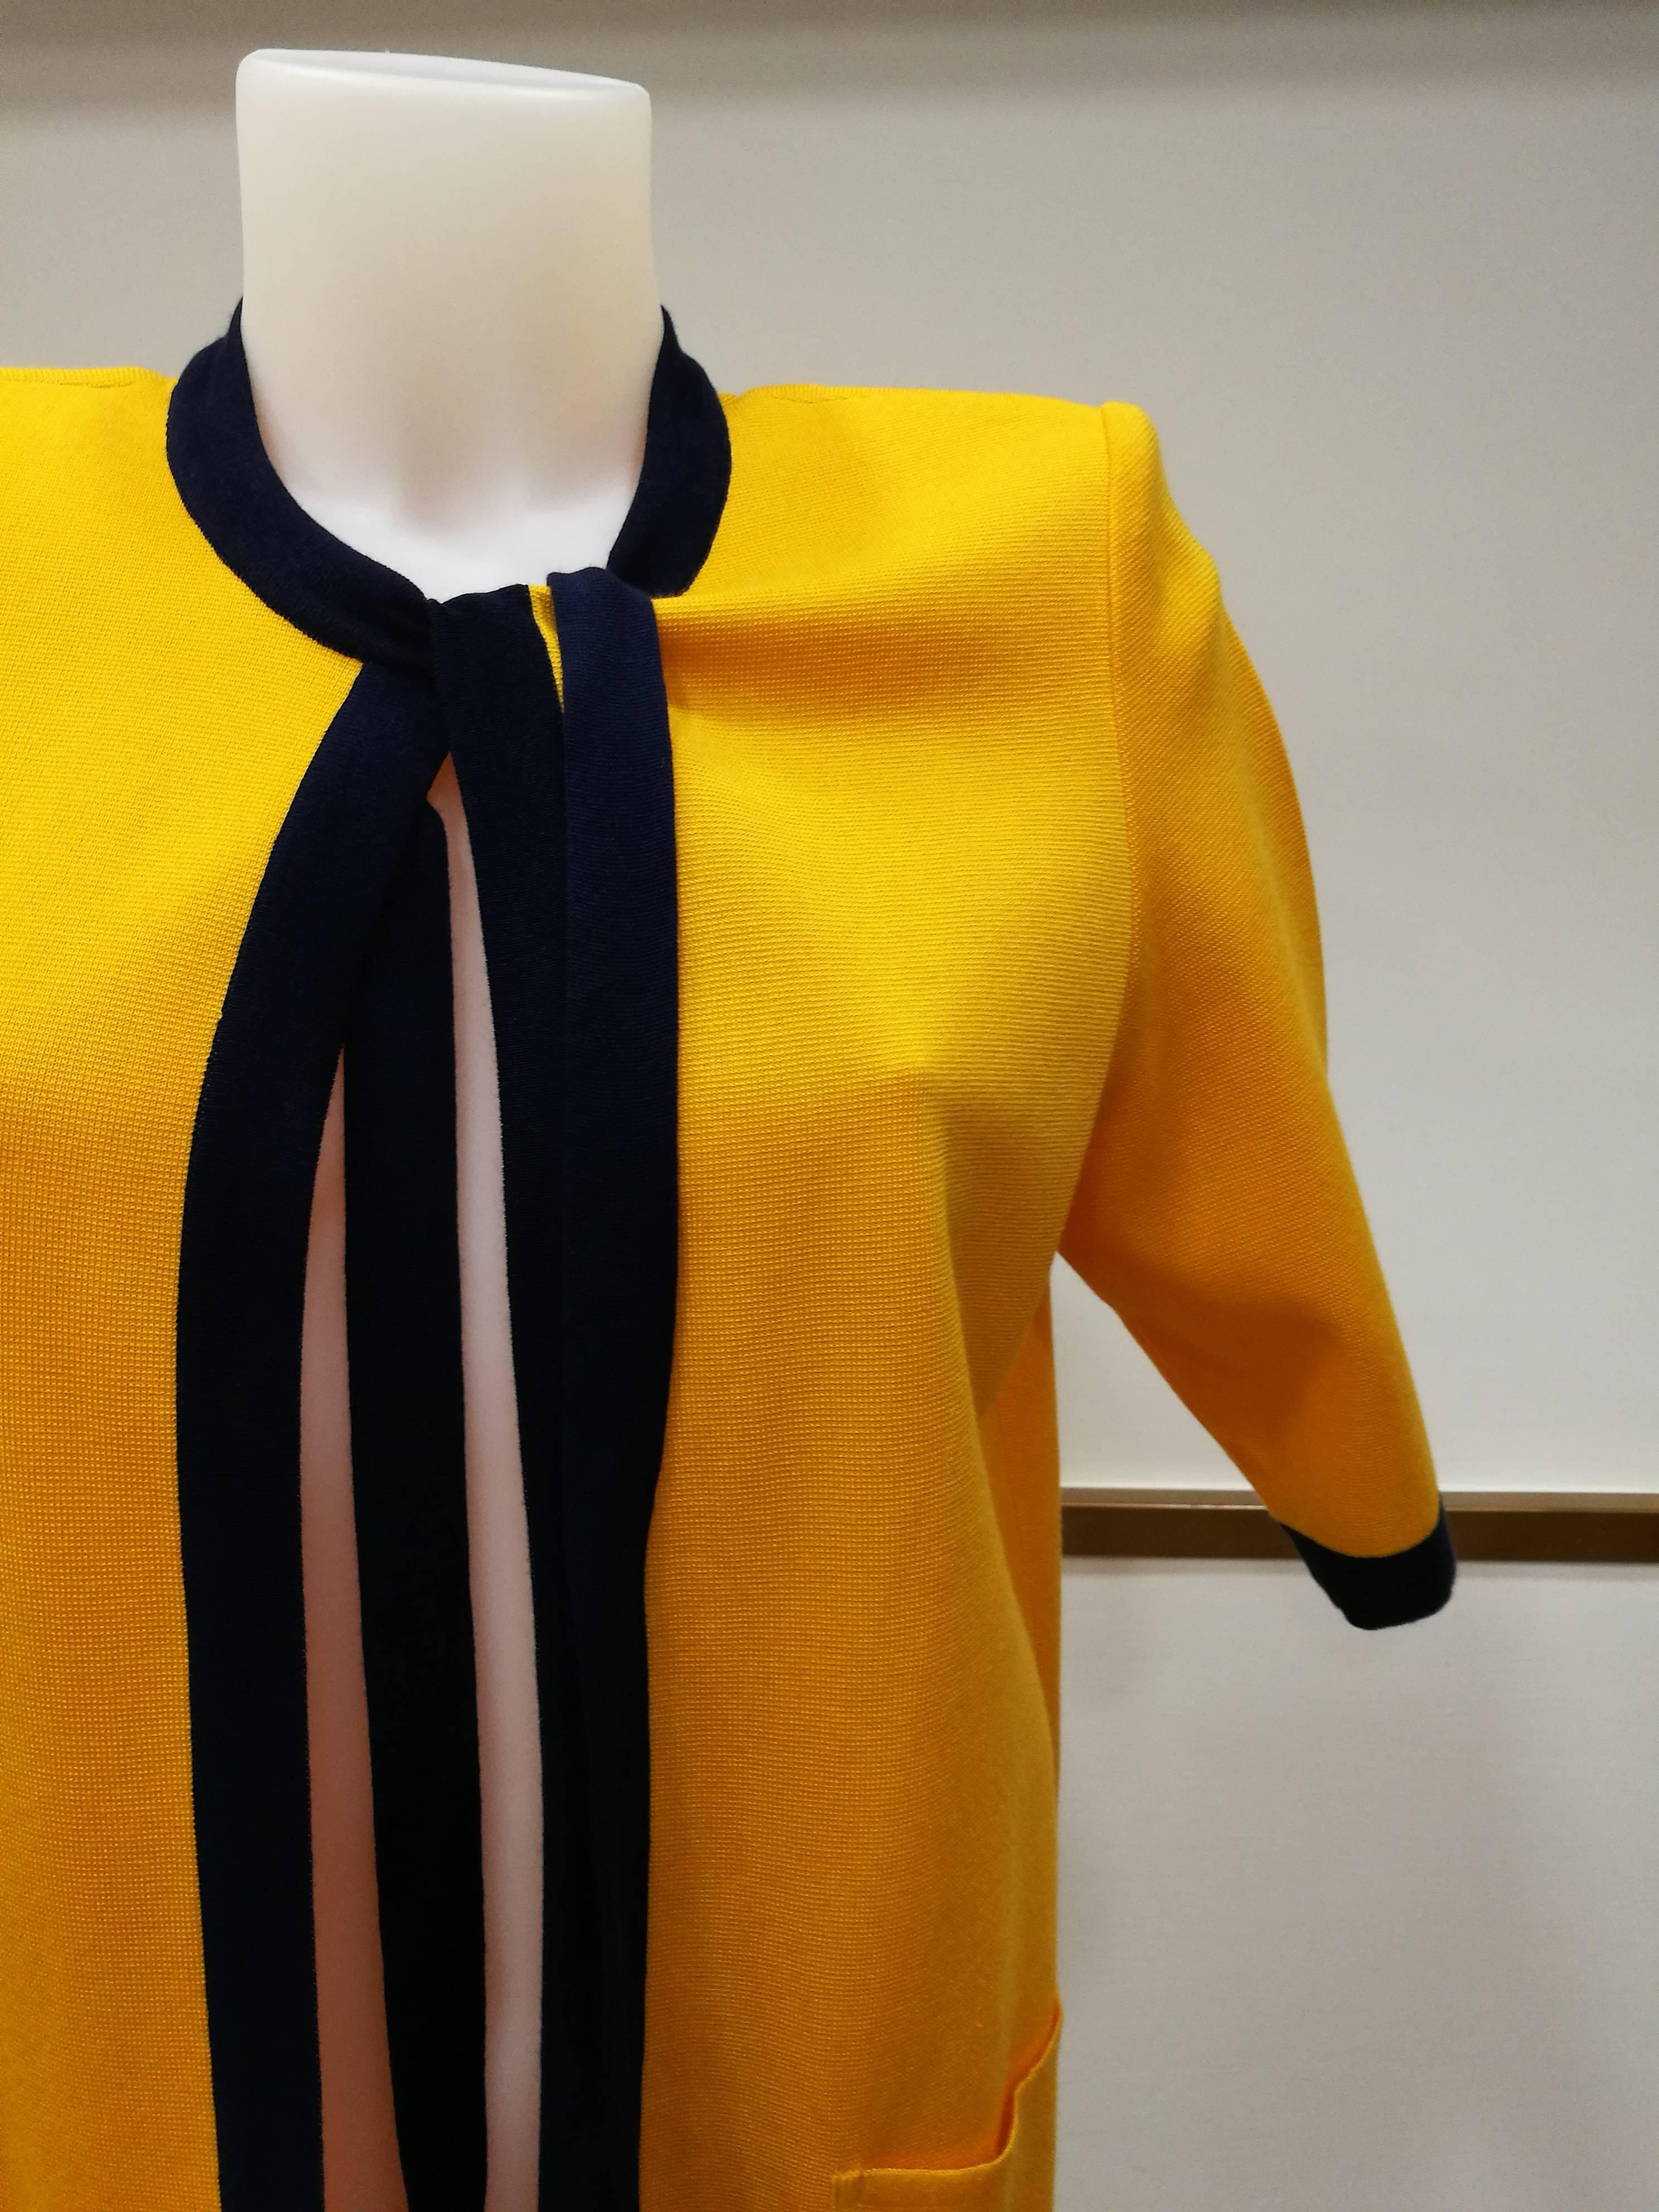 1980s Yves Saint Laurent Yellow Blu Cardigan

Totally made in France in size M

Short Sleeve and two tasks